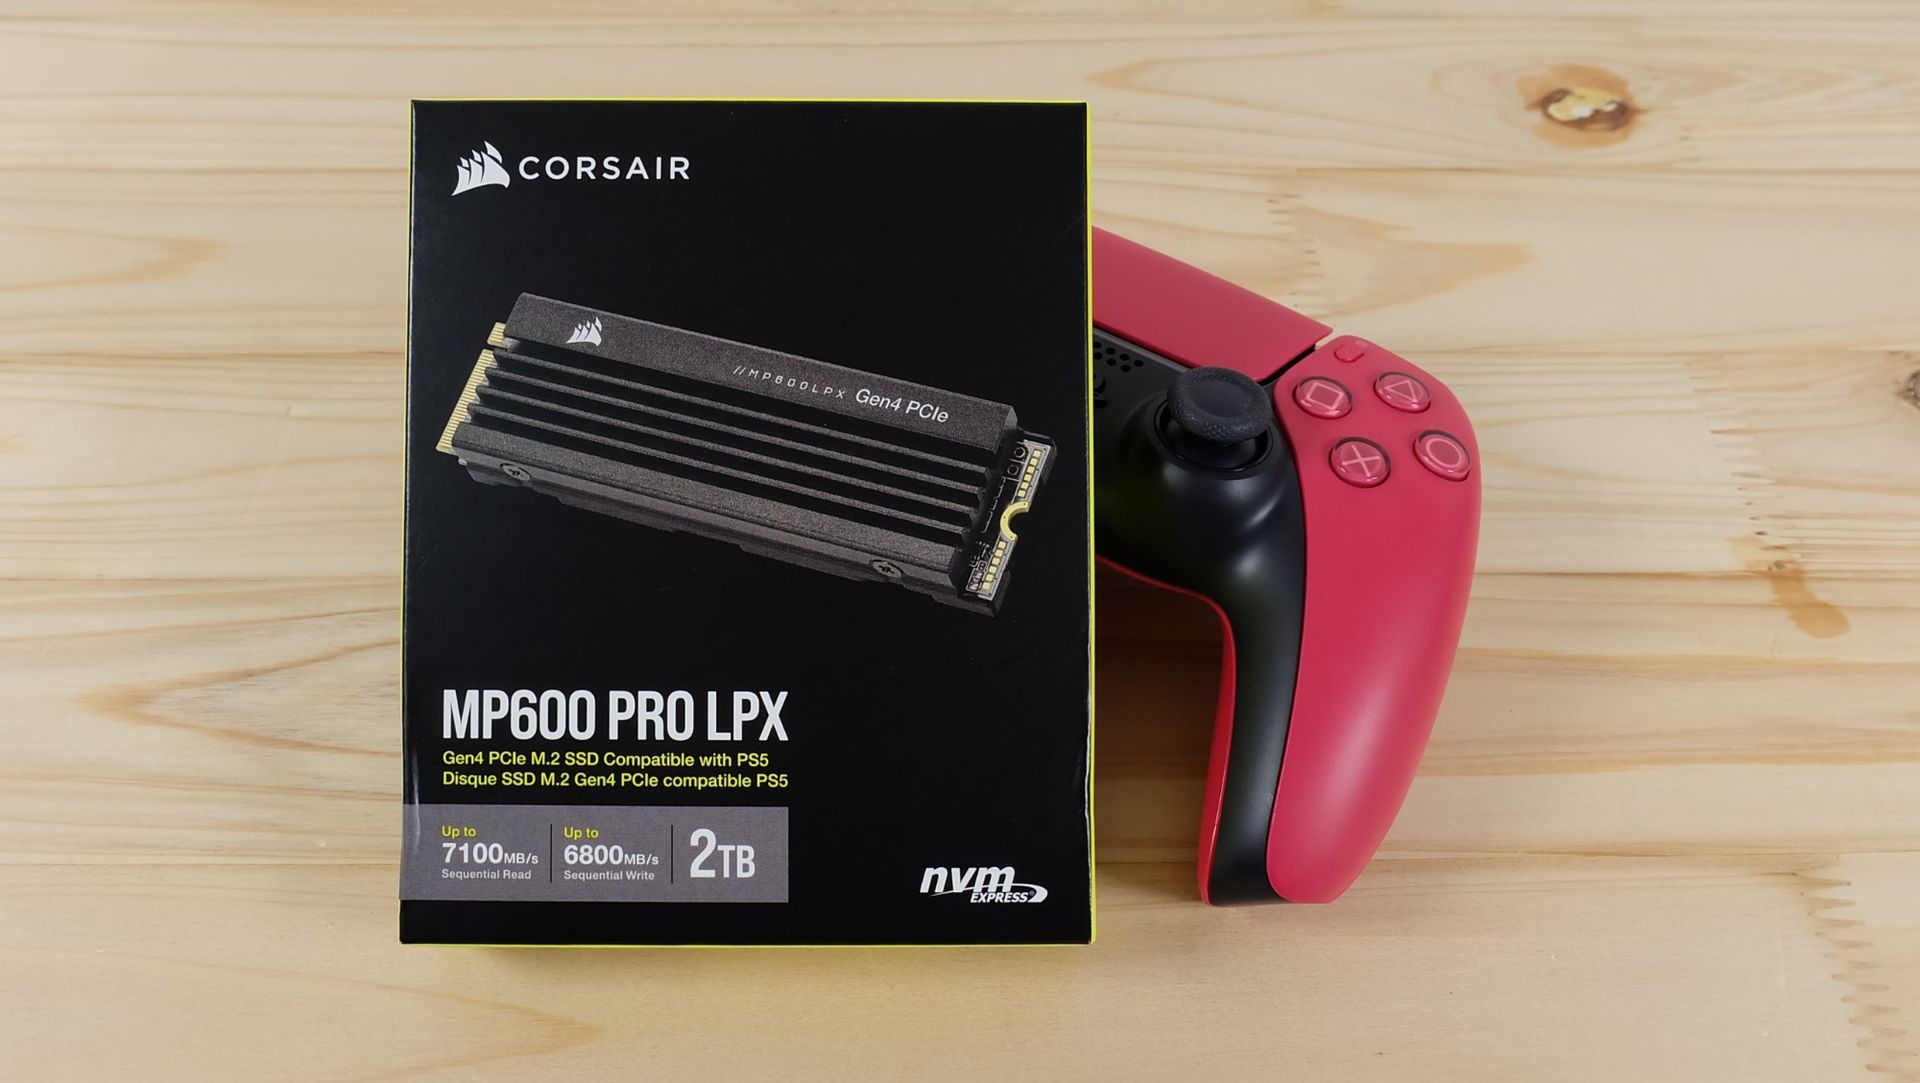 PS5 Storage Upgrade with Corsair MP600 PRO LPX 2TB NVMe SSD - PS5 Storage  Upgrade with Corsair MP600 PRO LPX 2TB NVMe SSD